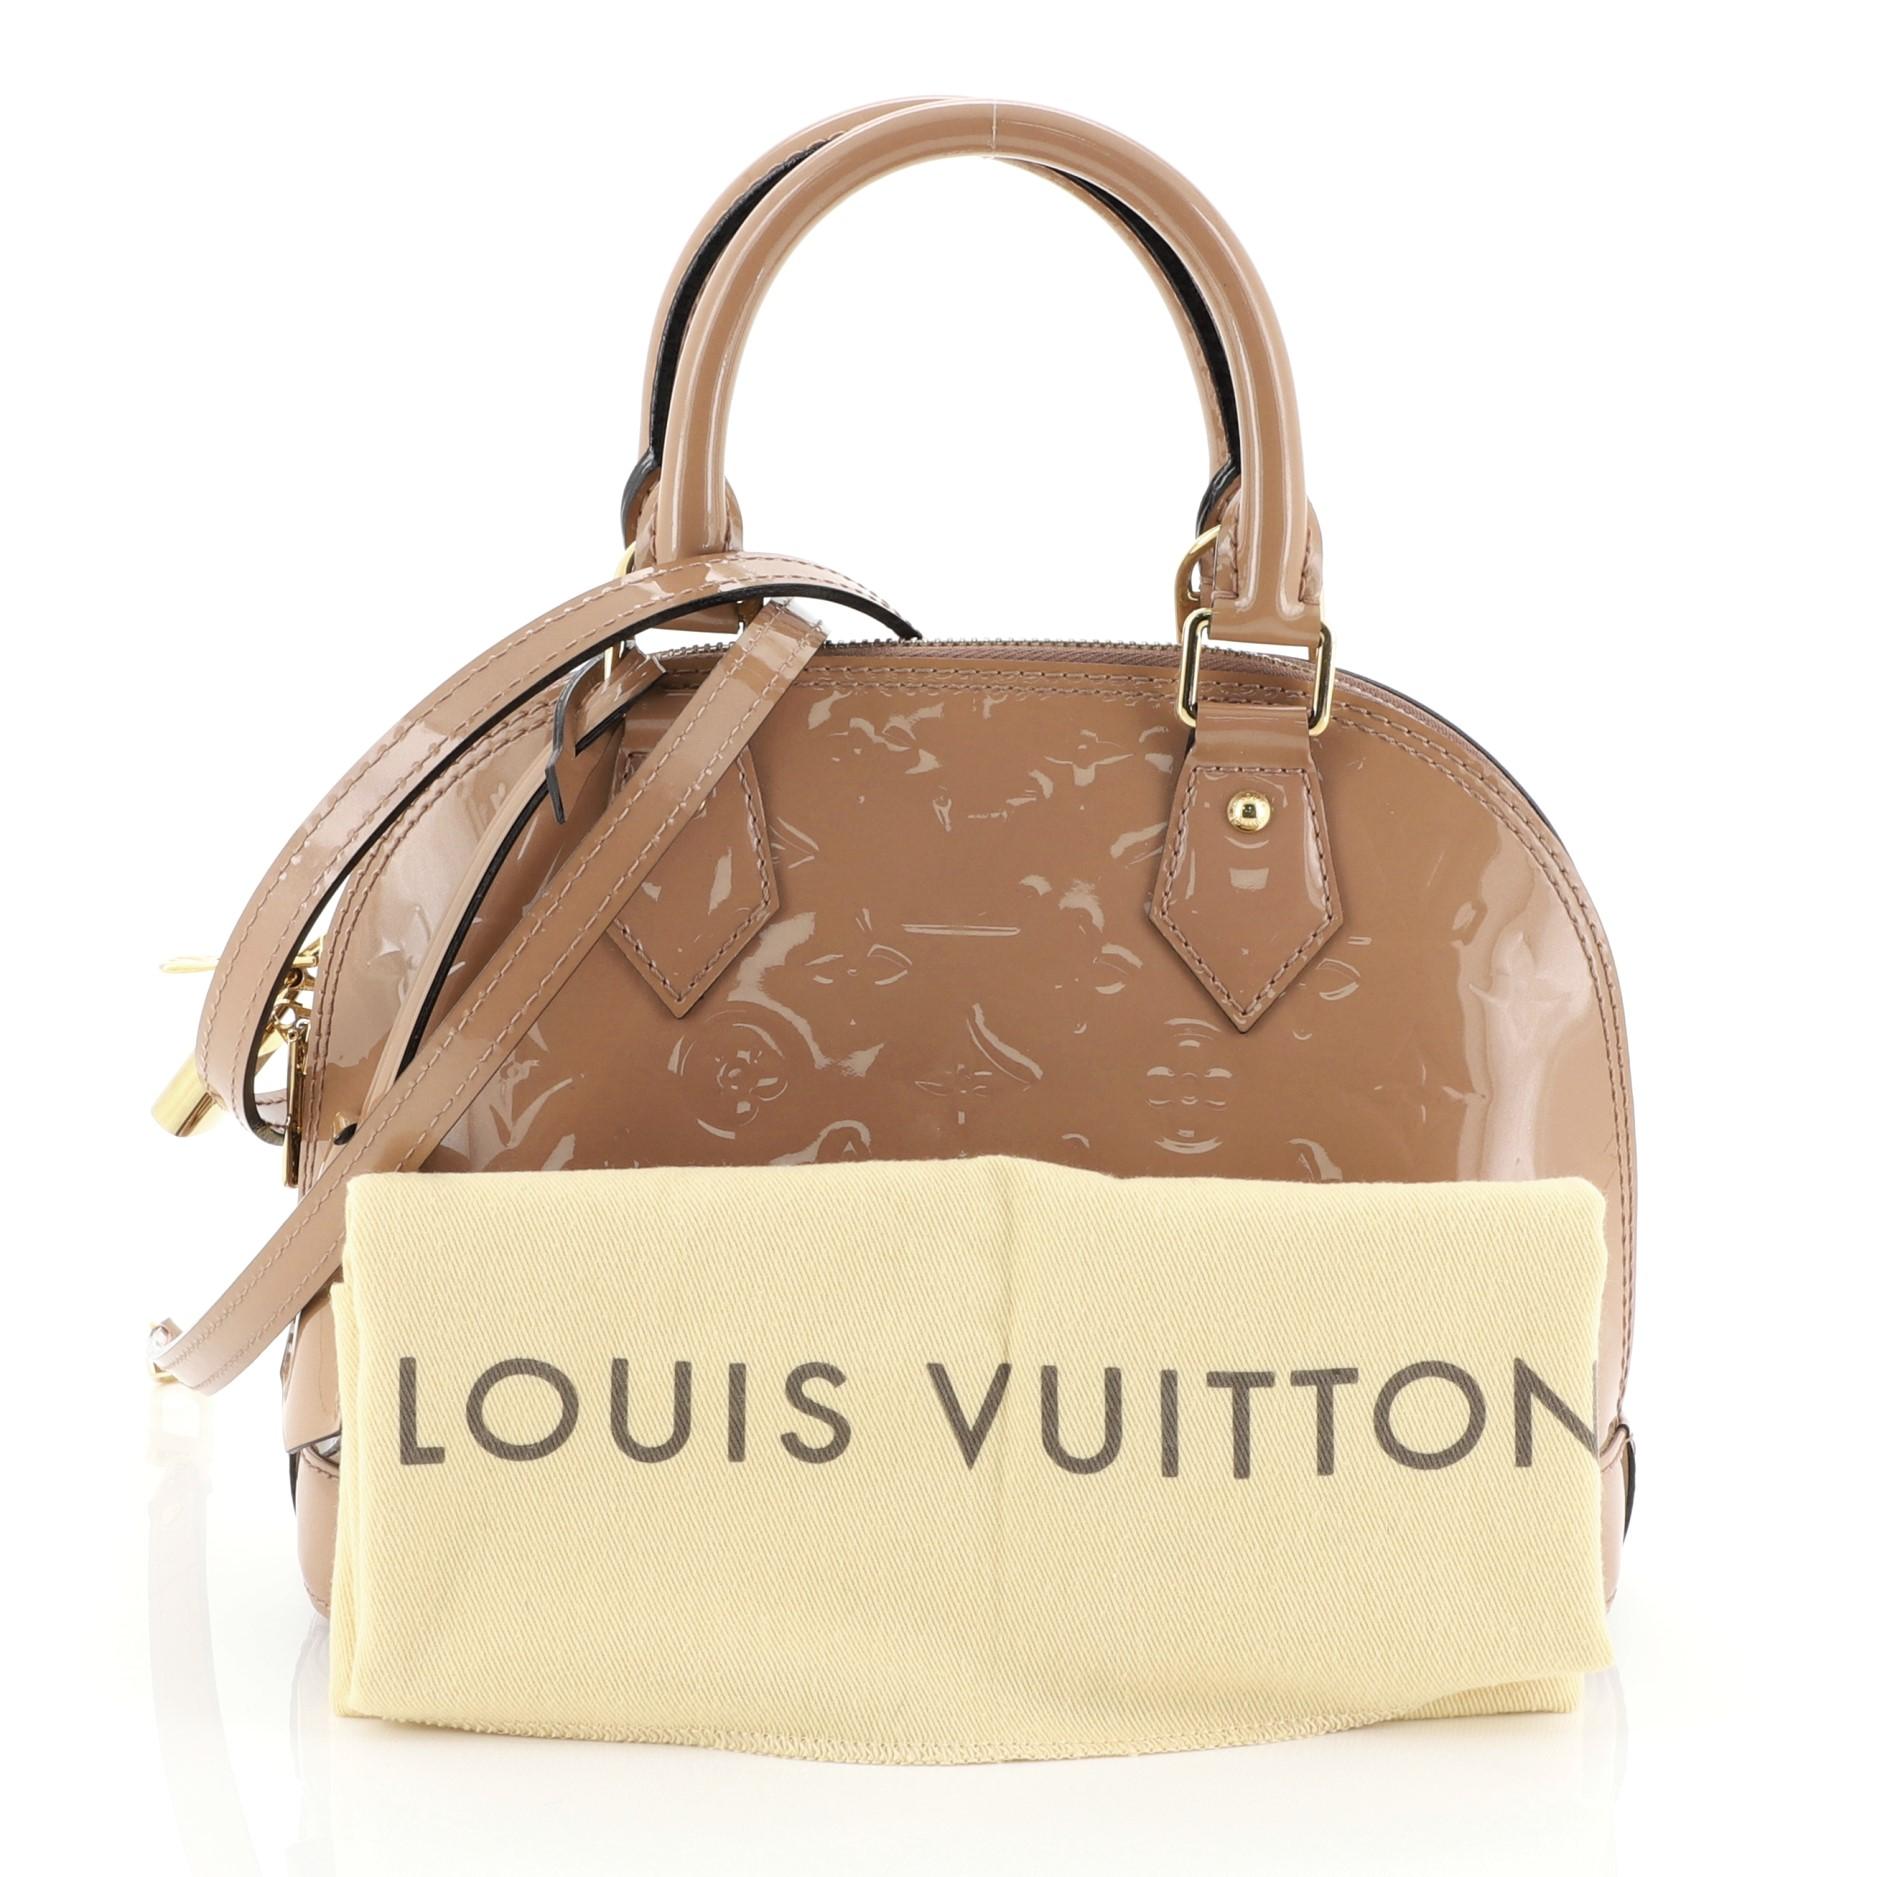 This Louis Vuitton Alma Handbag Monogram Vernis BB, crafted from neutral monogram vernis leather, features dual rolled handles, protective base studs, and gold-tone hardware. Its two-way zip closure opens to a neutral fabric interior with slip